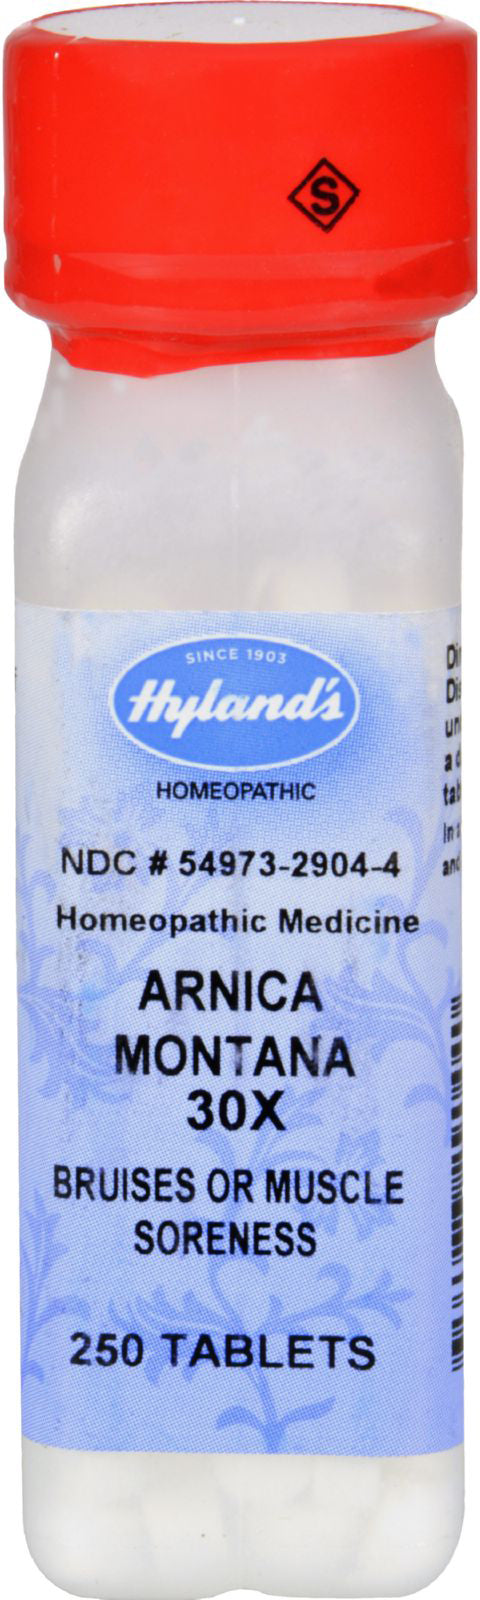 Arnica Montana 30x, 250 Tablets , Brand_Hyland's Homeopathic Form_Tablets Size_250 Tabs